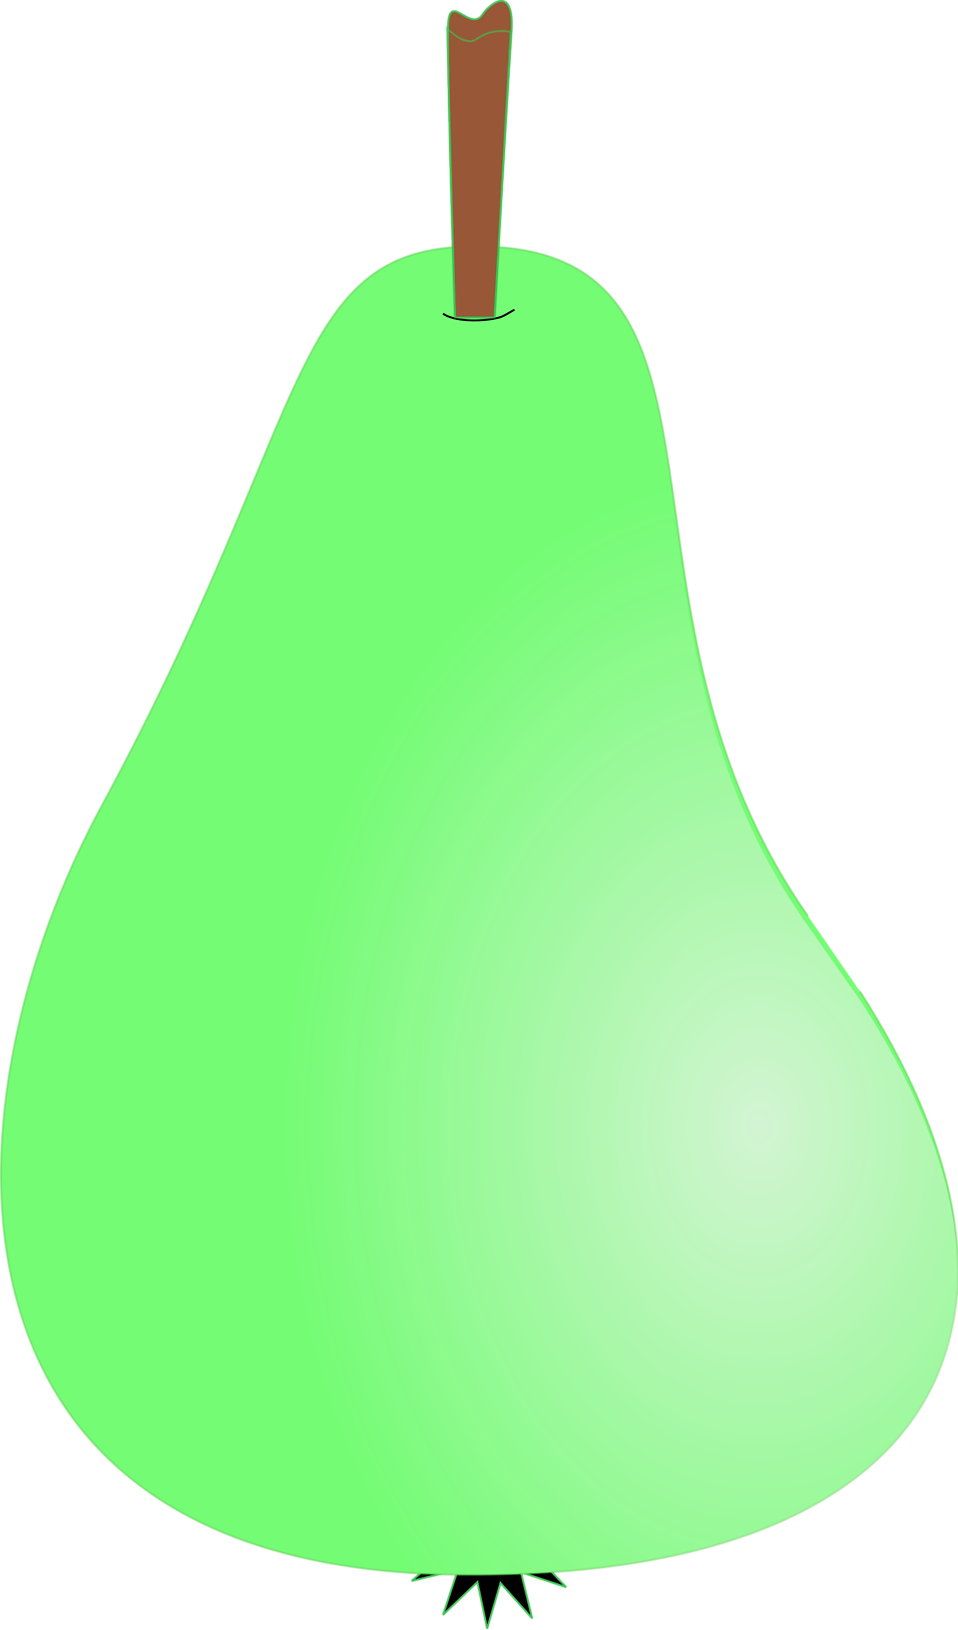 pear clipart illustrated